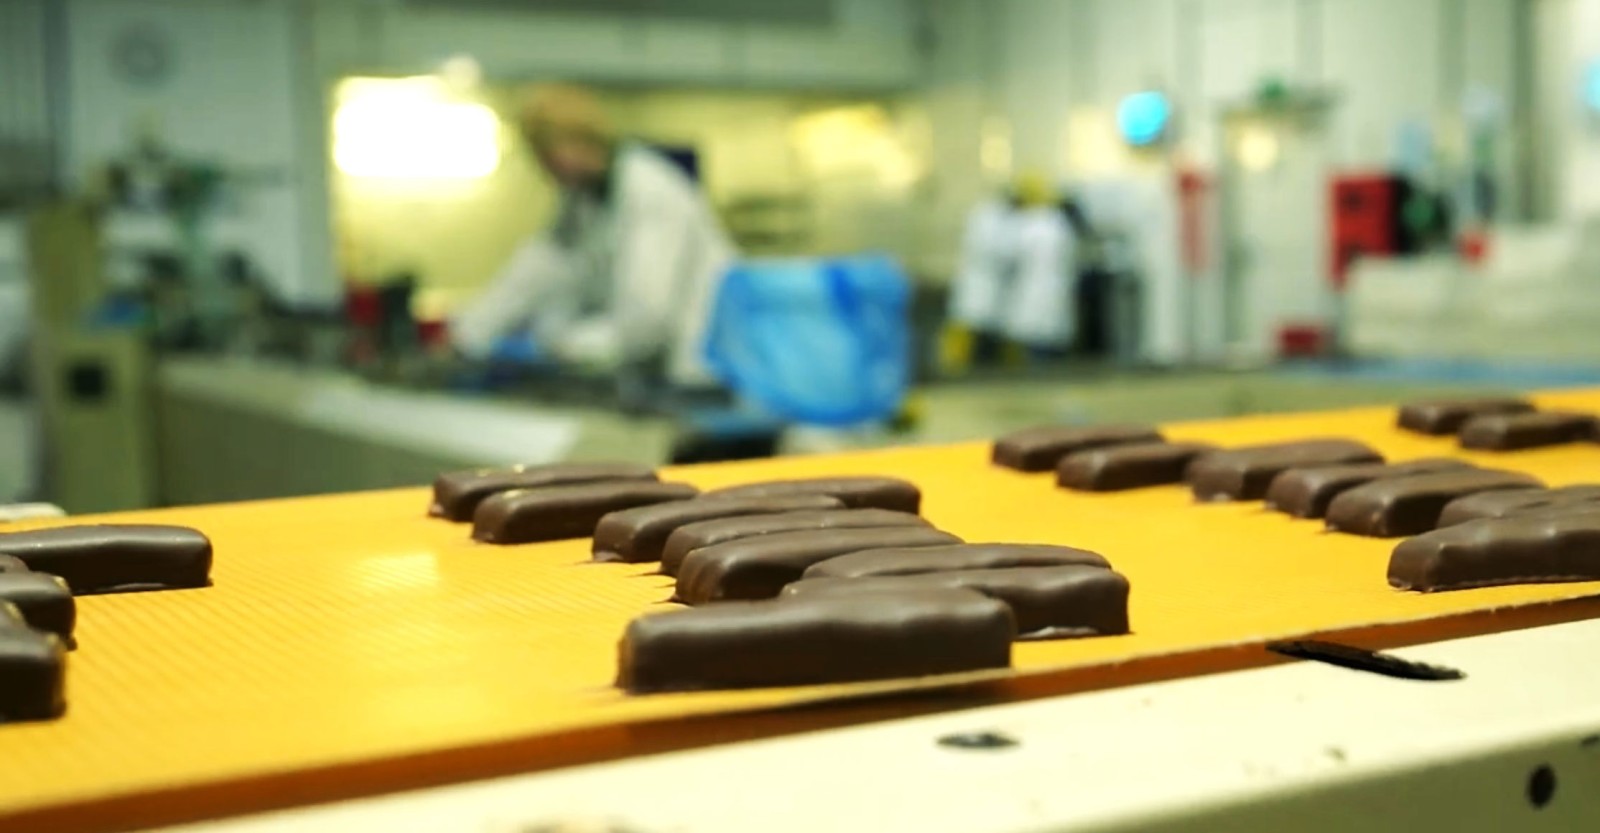 Chocolates being made